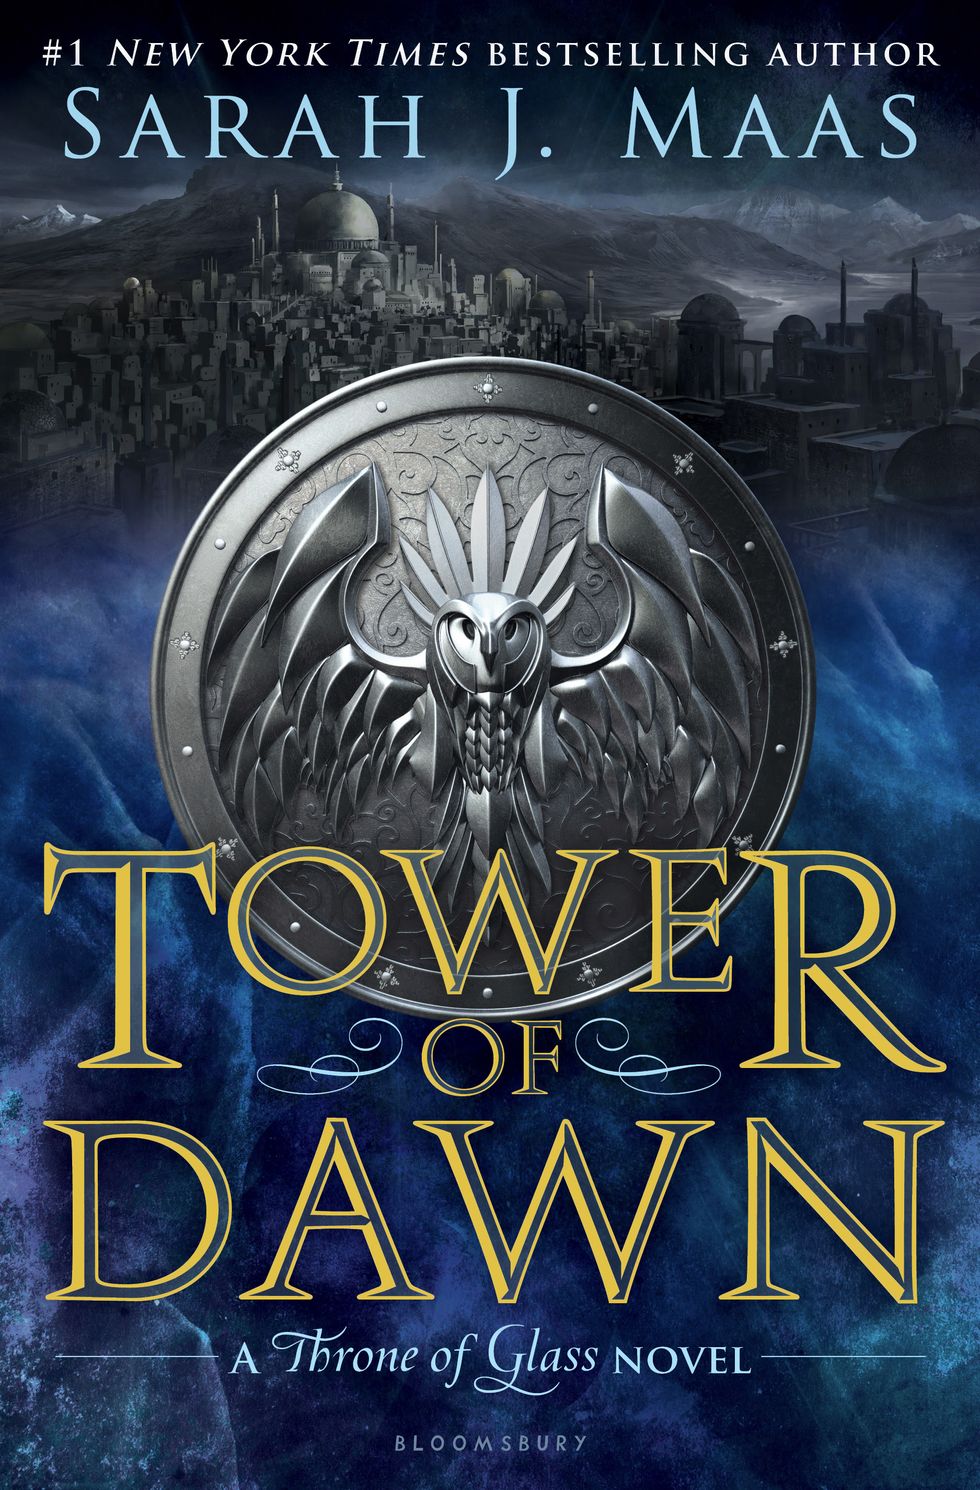 Review of "Tower of Dawn" by Sarah J. Maas